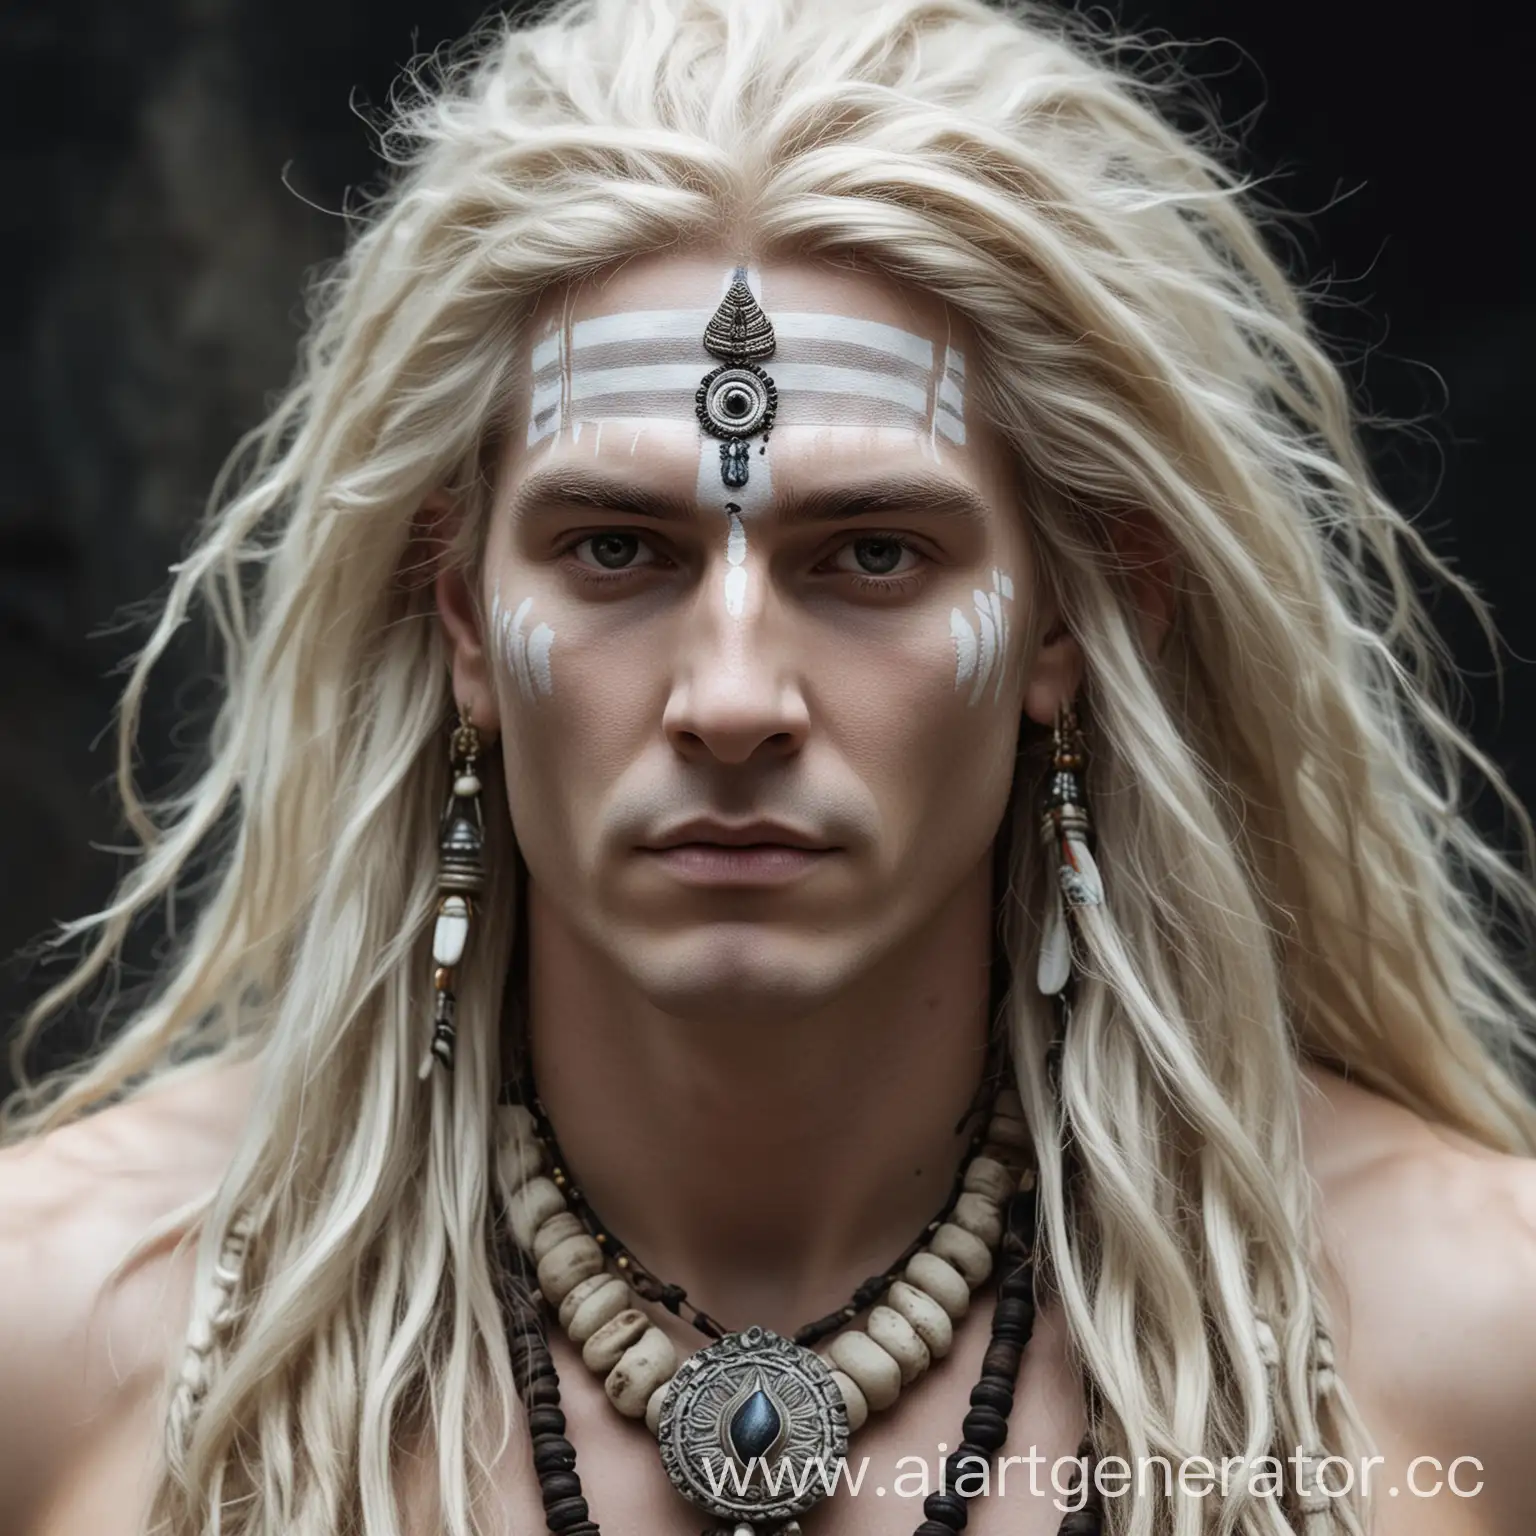 White-Man-Resembling-Ancient-Indian-Deity-with-Long-Hair